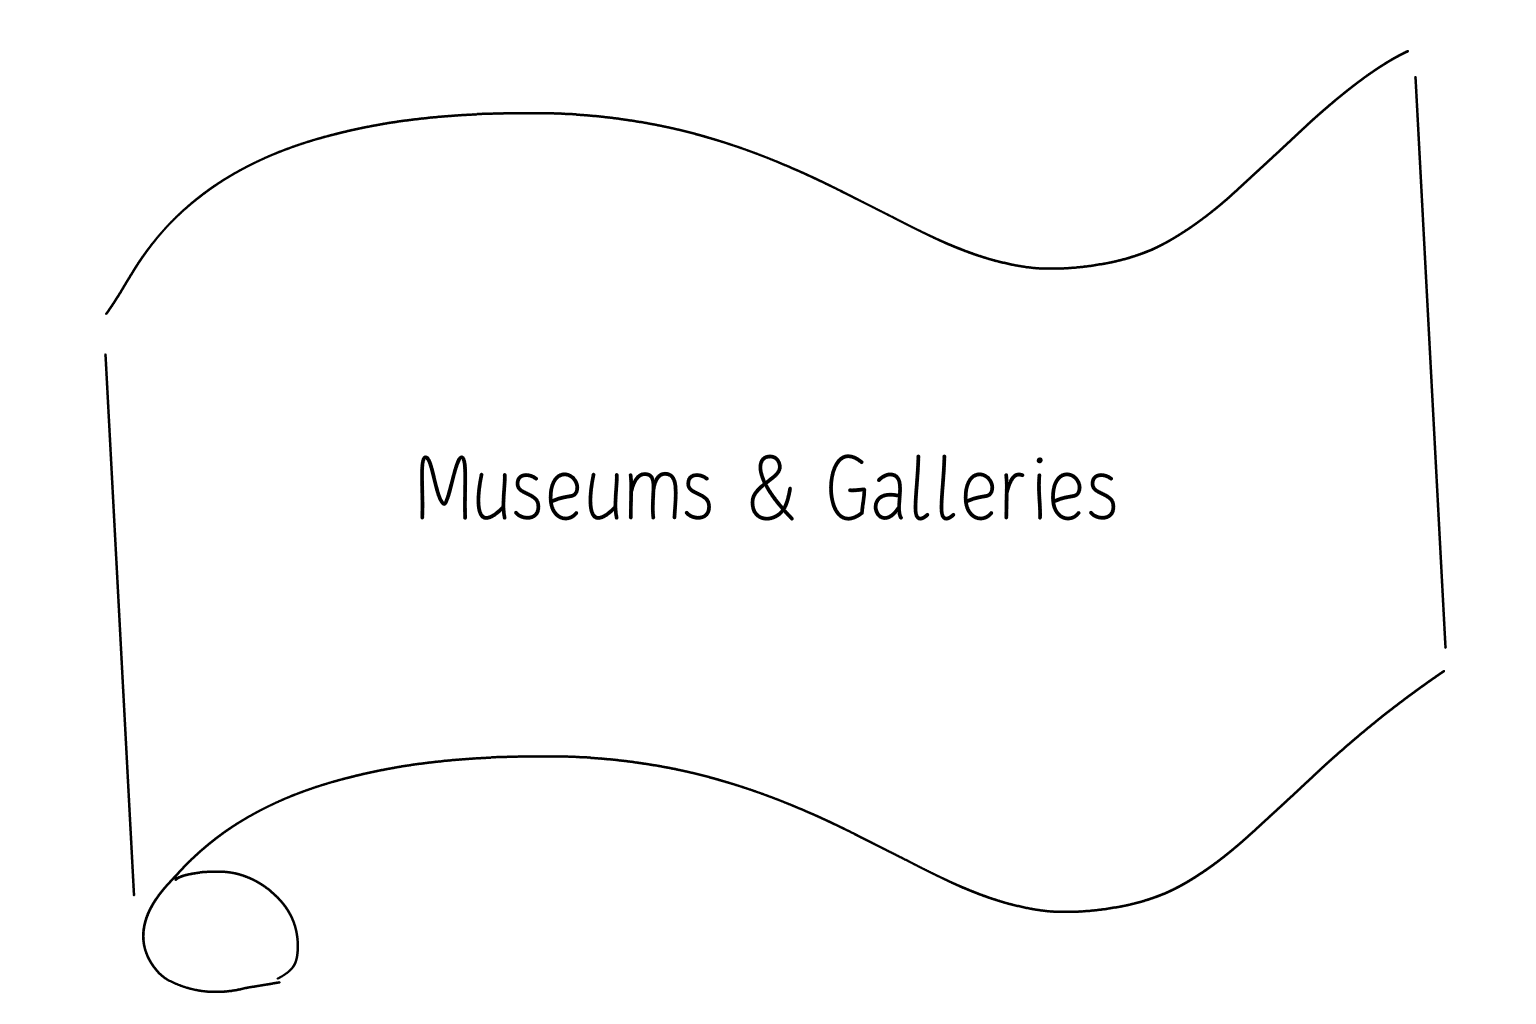 Illustration of Museums & Galleries